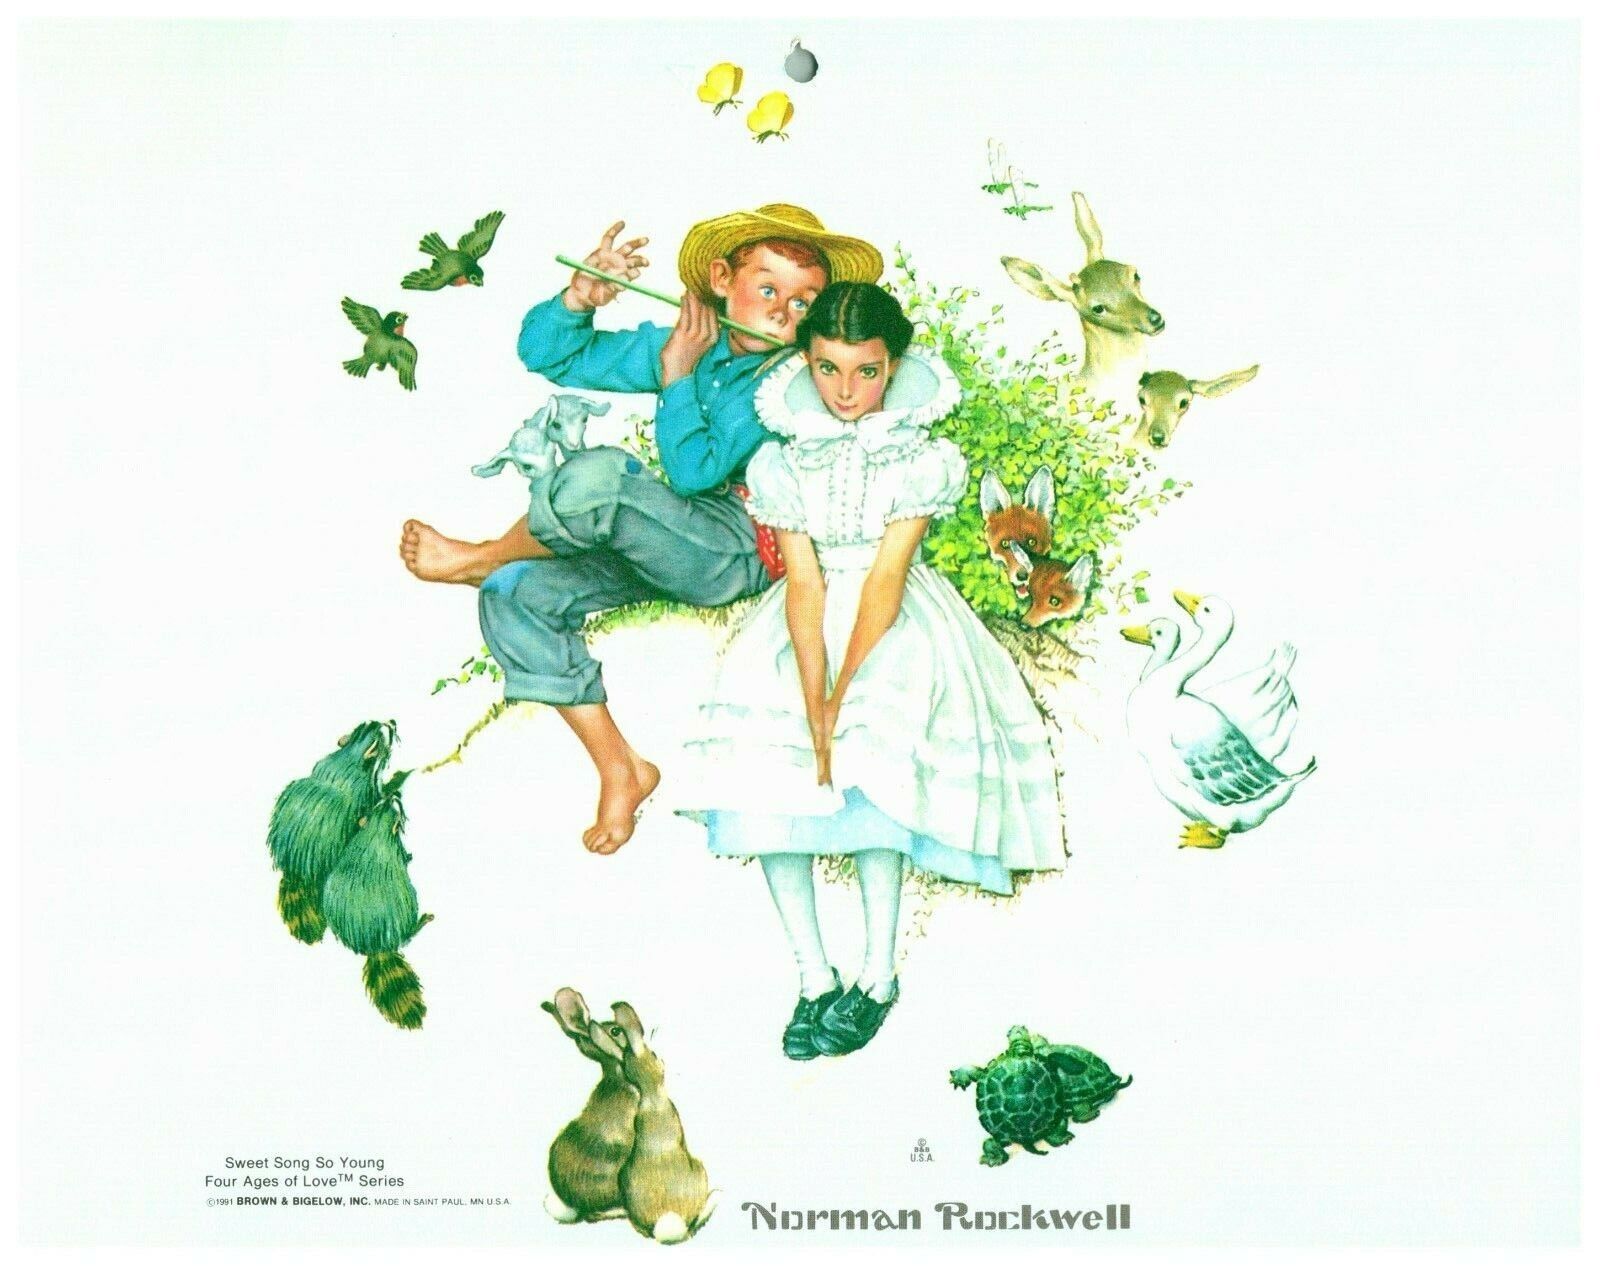 Sweet Song So Young Four Ages of Love Series 1991 Norman Rockwell Calendar